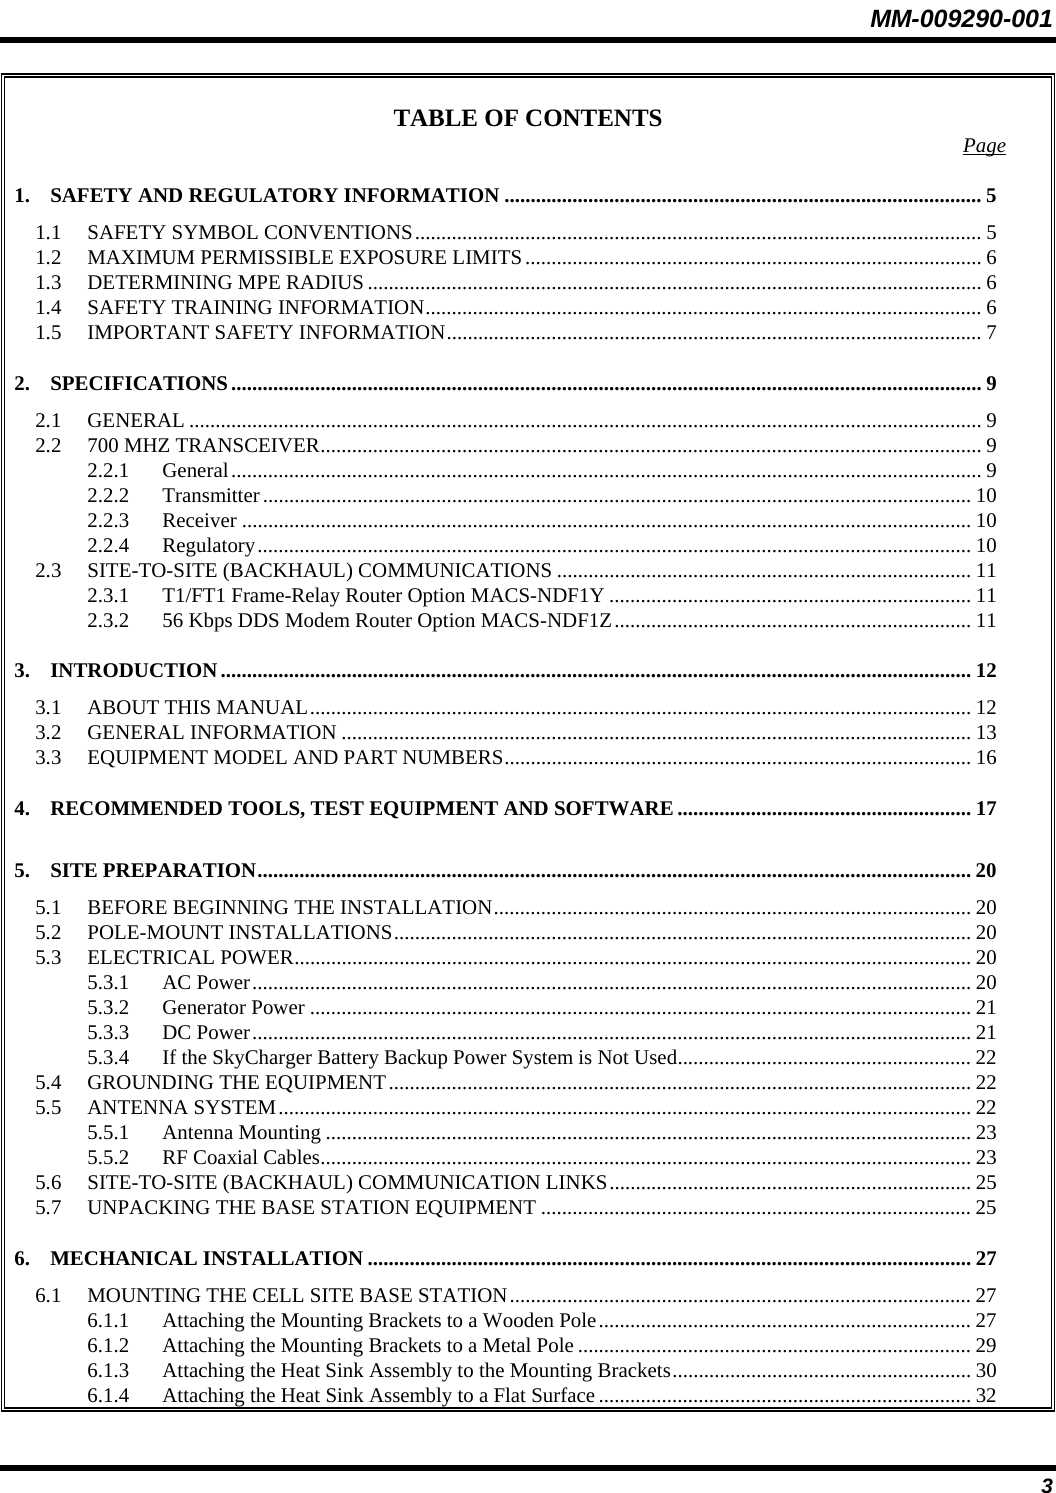 MM-009290-001  3 TABLE OF CONTENTS  Page 1. SAFETY AND REGULATORY INFORMATION ........................................................................................... 5 1.1 SAFETY SYMBOL CONVENTIONS............................................................................................................ 5 1.2 MAXIMUM PERMISSIBLE EXPOSURE LIMITS....................................................................................... 6 1.3 DETERMINING MPE RADIUS ..................................................................................................................... 6 1.4 SAFETY TRAINING INFORMATION.......................................................................................................... 6 1.5 IMPORTANT SAFETY INFORMATION...................................................................................................... 7 2. SPECIFICATIONS............................................................................................................................................... 9 2.1 GENERAL ....................................................................................................................................................... 9 2.2 700 MHZ TRANSCEIVER.............................................................................................................................. 9 2.2.1 General............................................................................................................................................... 9 2.2.2 Transmitter....................................................................................................................................... 10 2.2.3 Receiver ........................................................................................................................................... 10 2.2.4 Regulatory........................................................................................................................................ 10 2.3 SITE-TO-SITE (BACKHAUL) COMMUNICATIONS ............................................................................... 11 2.3.1 T1/FT1 Frame-Relay Router Option MACS-NDF1Y ..................................................................... 11 2.3.2 56 Kbps DDS Modem Router Option MACS-NDF1Z.................................................................... 11 3. INTRODUCTION............................................................................................................................................... 12 3.1 ABOUT THIS MANUAL.............................................................................................................................. 12 3.2 GENERAL INFORMATION ........................................................................................................................ 13 3.3 EQUIPMENT MODEL AND PART NUMBERS......................................................................................... 16 4. RECOMMENDED TOOLS, TEST EQUIPMENT AND SOFTWARE ........................................................ 17 5. SITE PREPARATION........................................................................................................................................ 20 5.1 BEFORE BEGINNING THE INSTALLATION........................................................................................... 20 5.2 POLE-MOUNT INSTALLATIONS.............................................................................................................. 20 5.3 ELECTRICAL POWER................................................................................................................................. 20 5.3.1 AC Power......................................................................................................................................... 20 5.3.2 Generator Power .............................................................................................................................. 21 5.3.3 DC Power......................................................................................................................................... 21 5.3.4 If the SkyCharger Battery Backup Power System is Not Used........................................................ 22 5.4 GROUNDING THE EQUIPMENT............................................................................................................... 22 5.5 ANTENNA SYSTEM.................................................................................................................................... 22 5.5.1 Antenna Mounting ........................................................................................................................... 23 5.5.2 RF Coaxial Cables............................................................................................................................ 23 5.6 SITE-TO-SITE (BACKHAUL) COMMUNICATION LINKS..................................................................... 25 5.7 UNPACKING THE BASE STATION EQUIPMENT .................................................................................. 25 6. MECHANICAL INSTALLATION ................................................................................................................... 27 6.1 MOUNTING THE CELL SITE BASE STATION........................................................................................ 27 6.1.1 Attaching the Mounting Brackets to a Wooden Pole....................................................................... 27 6.1.2 Attaching the Mounting Brackets to a Metal Pole ........................................................................... 29 6.1.3 Attaching the Heat Sink Assembly to the Mounting Brackets......................................................... 30 6.1.4 Attaching the Heat Sink Assembly to a Flat Surface....................................................................... 32 